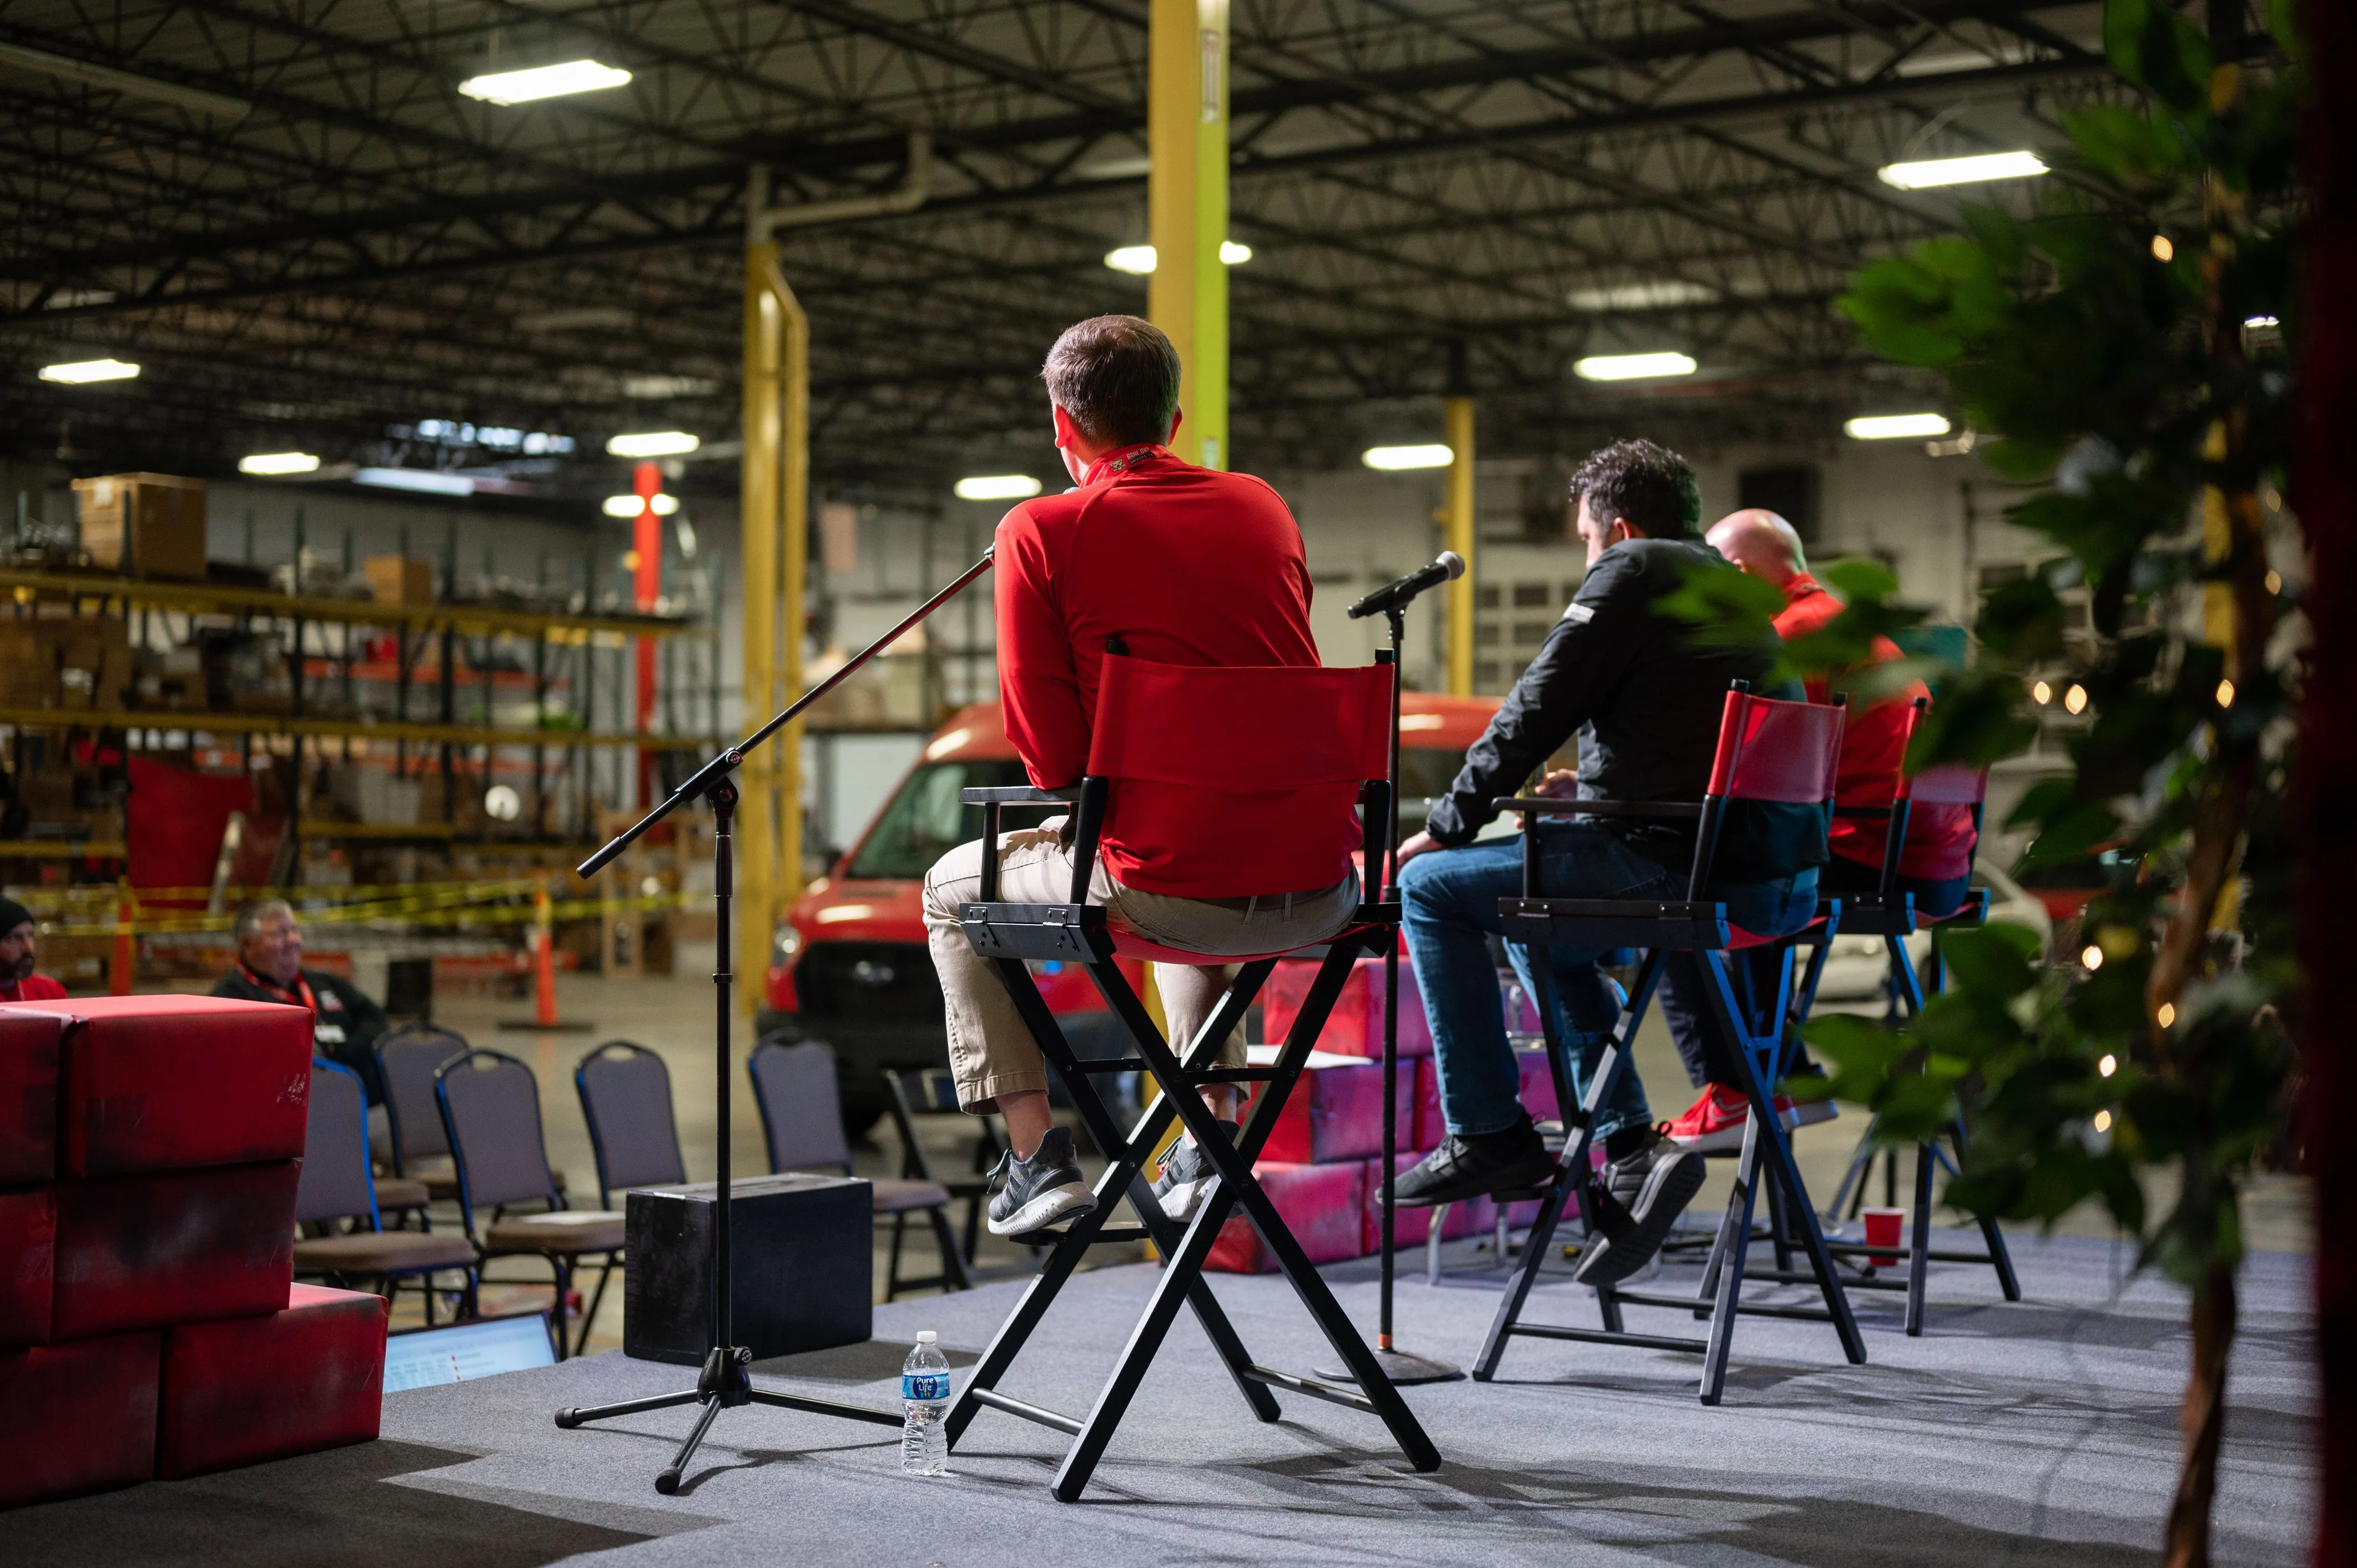 Three people sitting on high chairs in an industrial setting, possibly engaged in a discussion panel or interview, with warehouse shelves in the background.